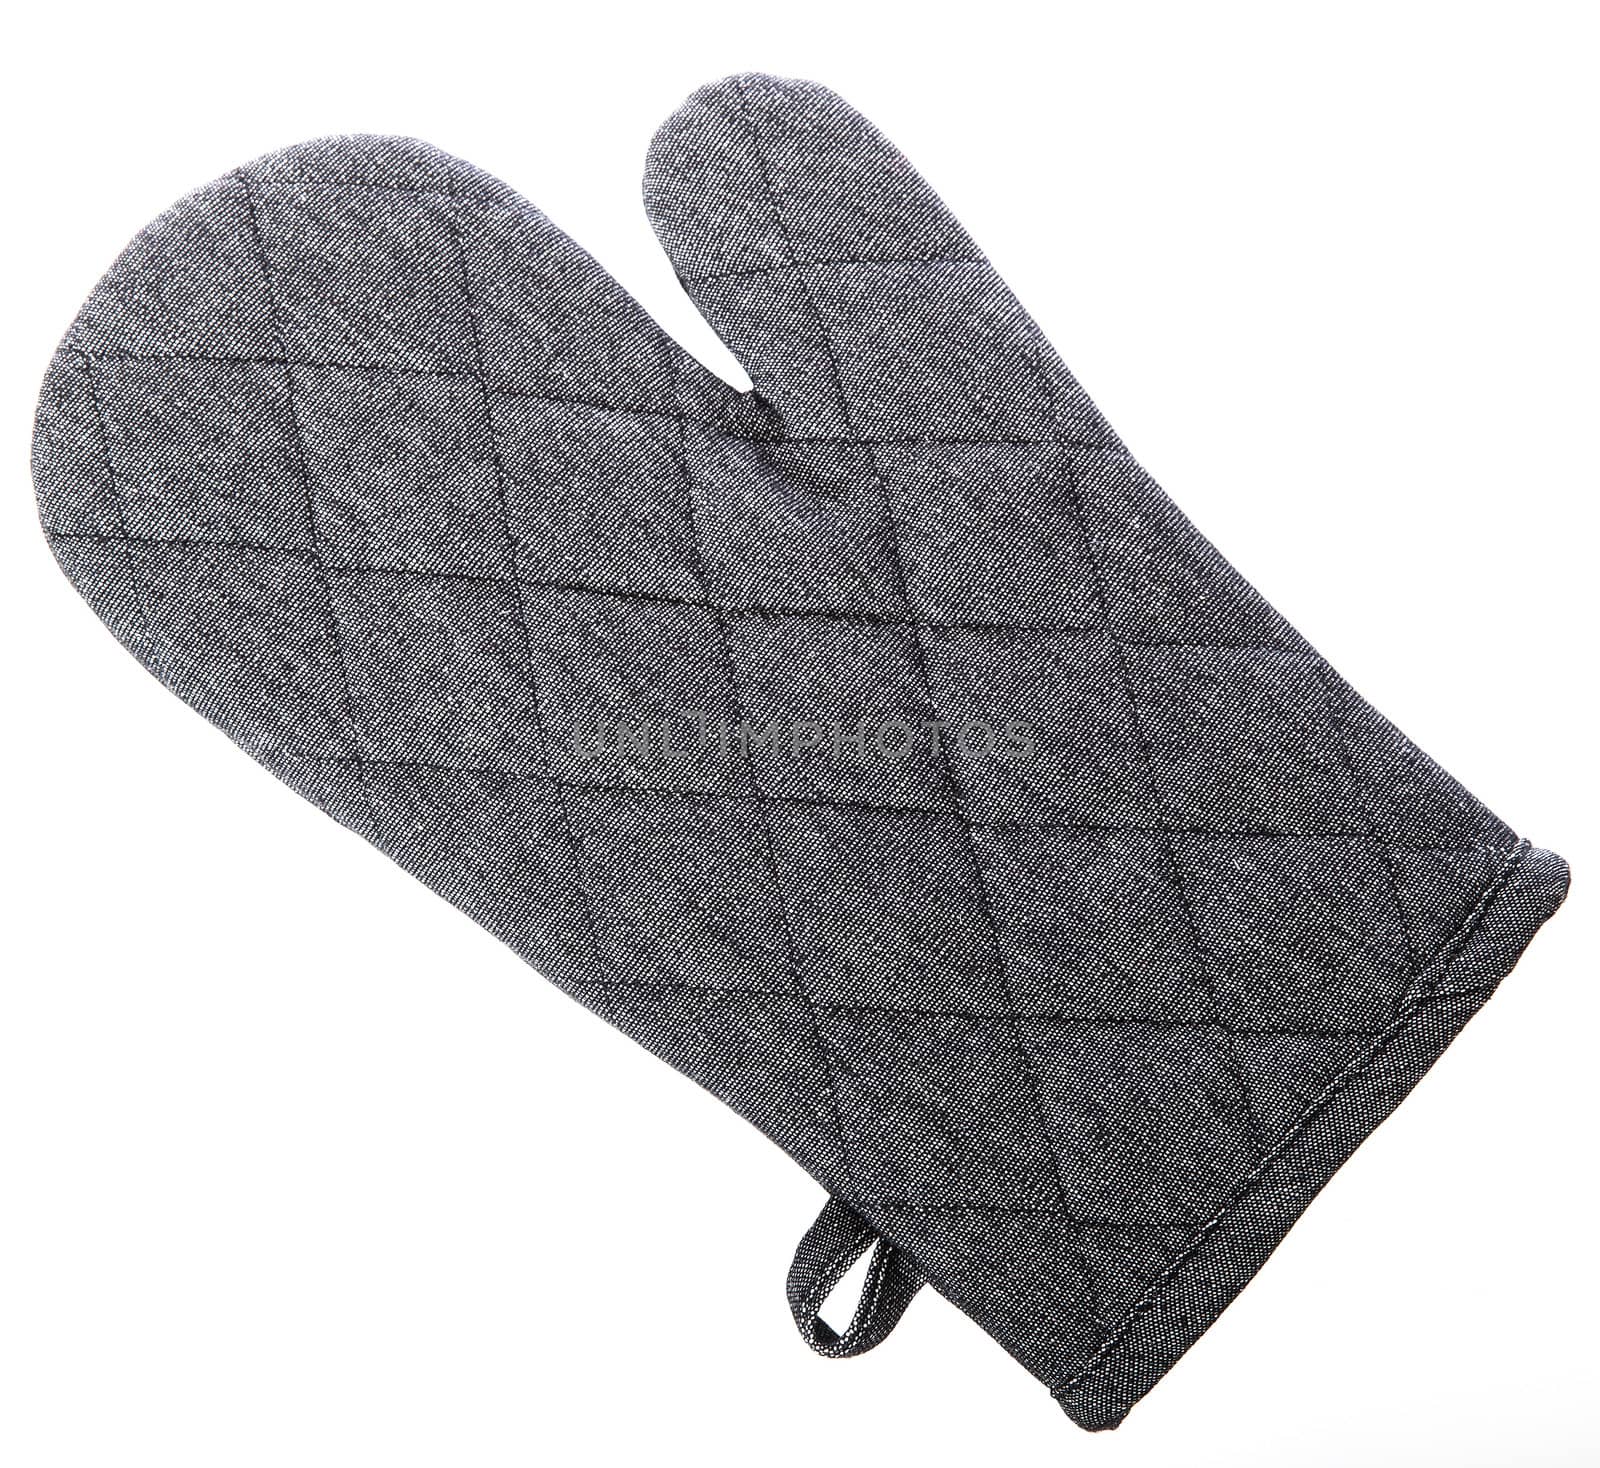 Oven Glove isolated on white background